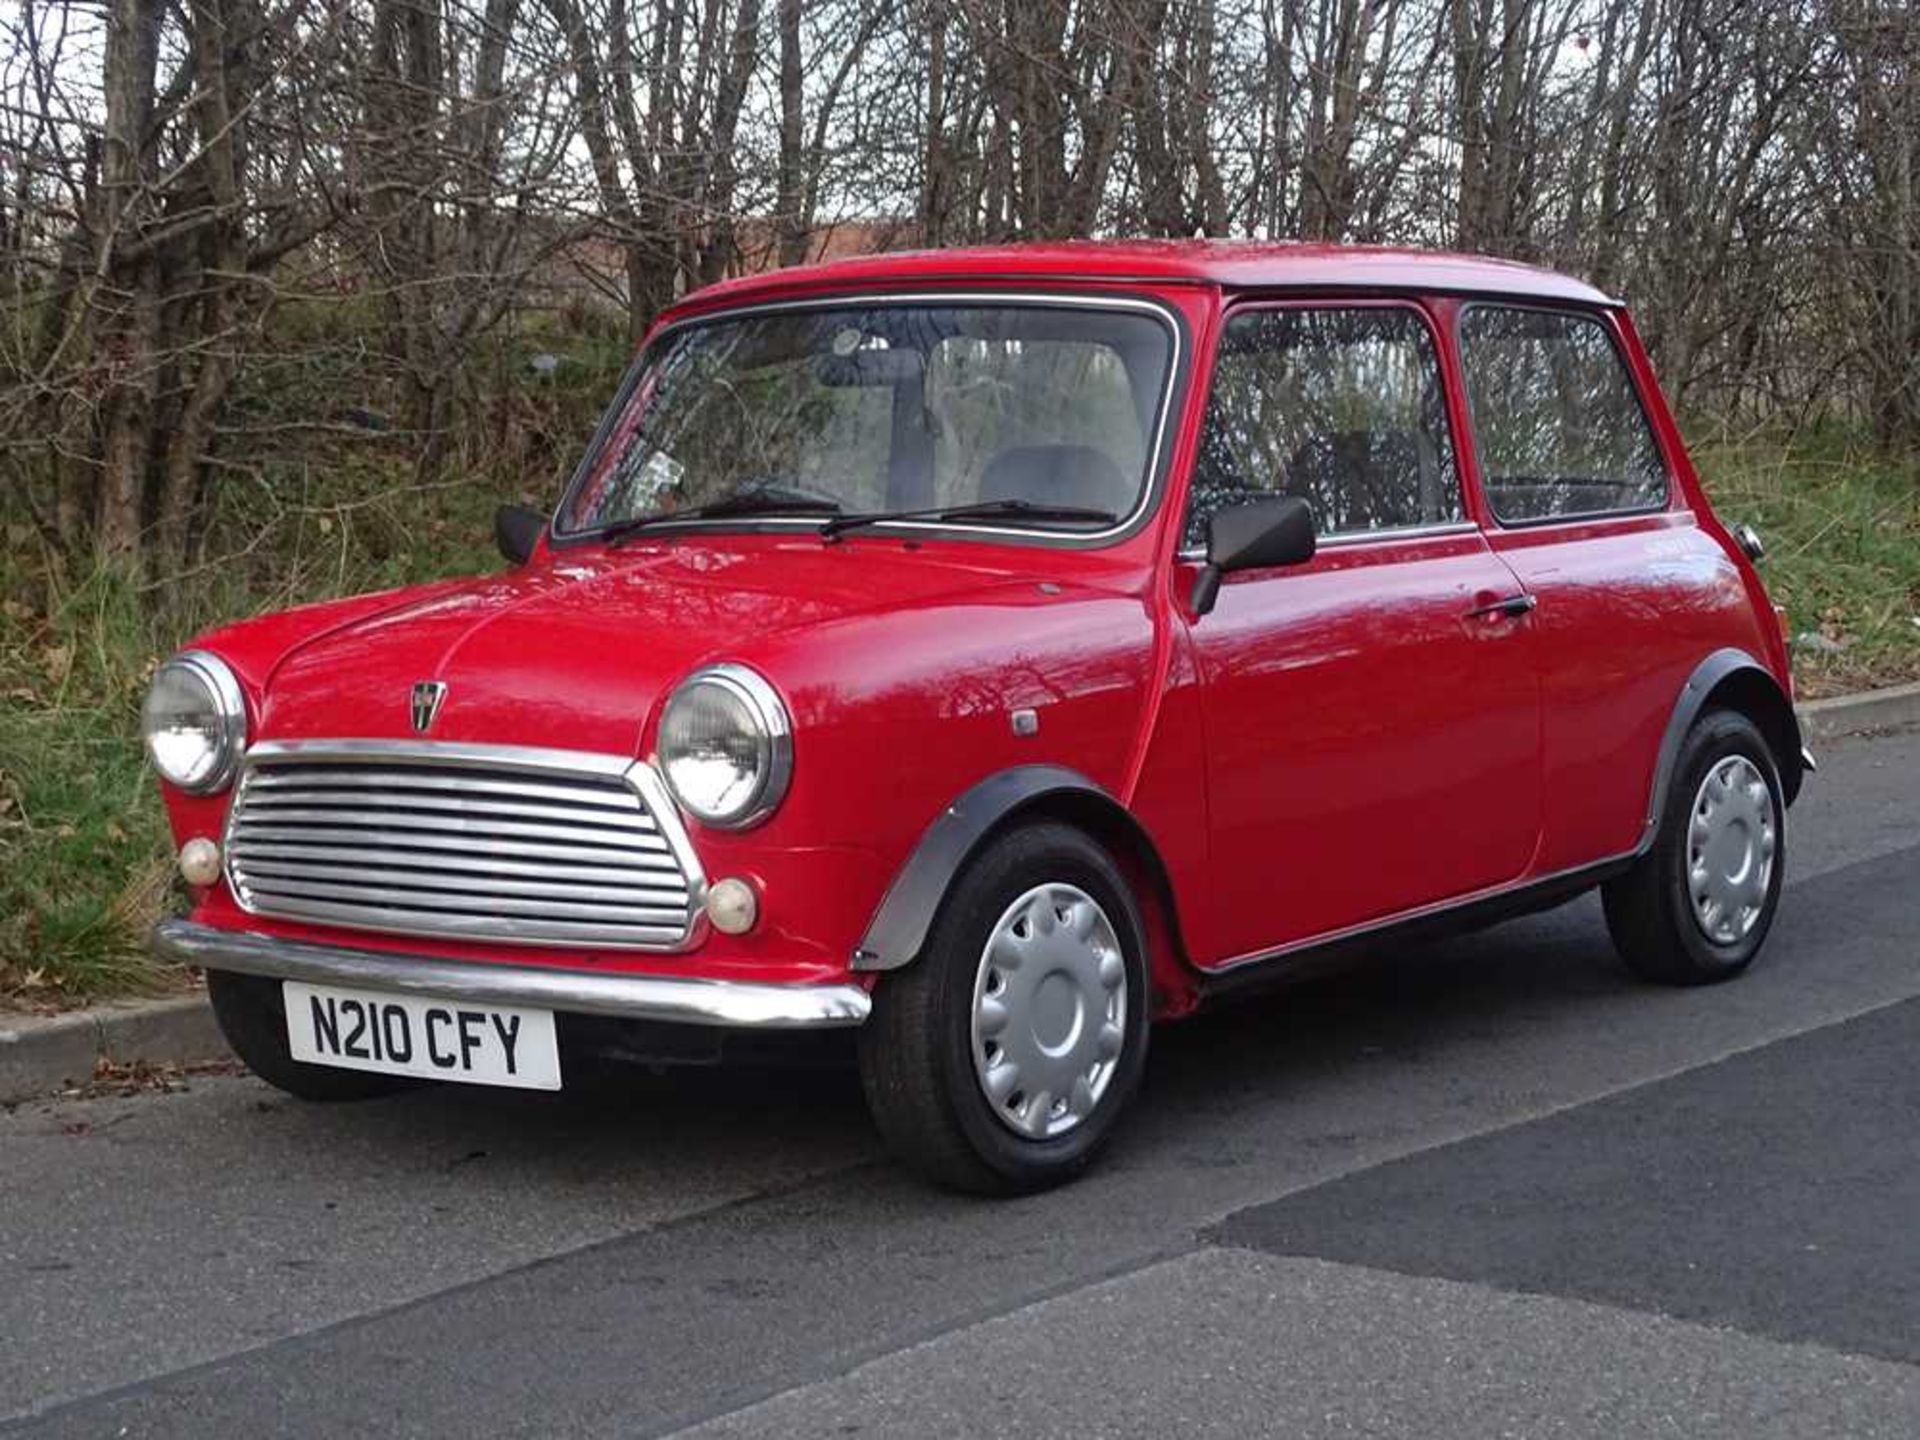 1995 Rover Mini Sprite Only c.22,500 miles from new - Image 5 of 52